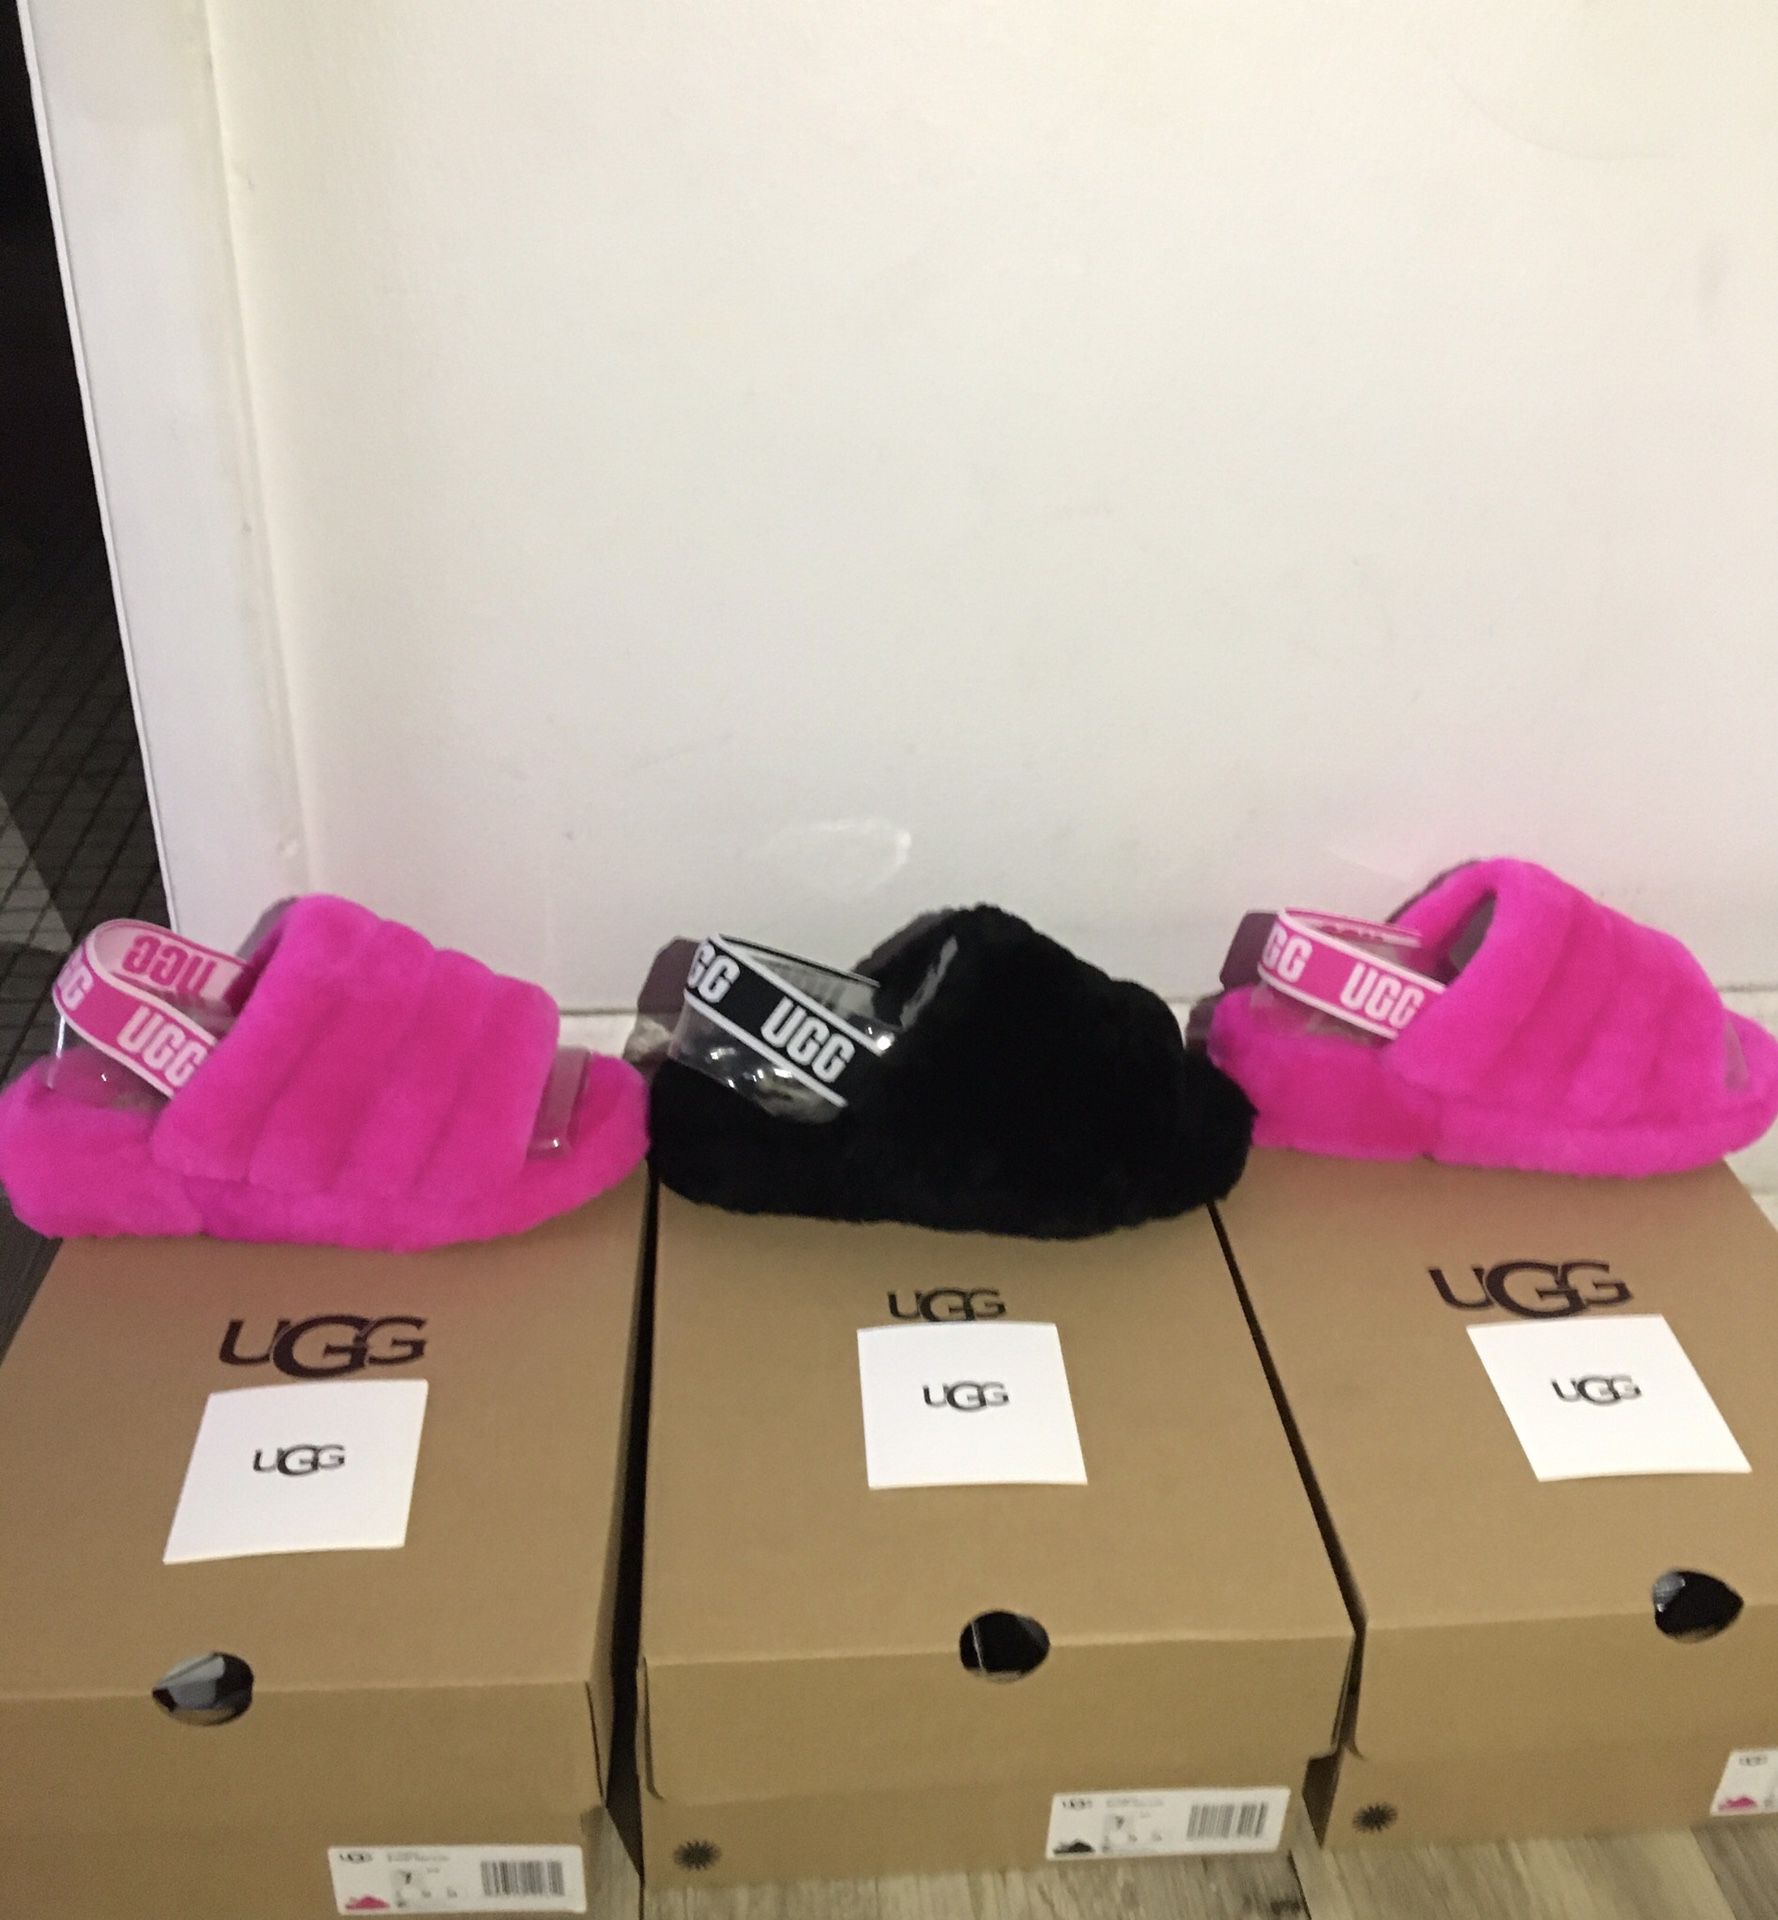 **AUTHENTIC BRAND NEW FRESH FROM BOX**WOMENS SLIDES UGG FLUFF YEAH SLIPPERS SIZE 7 PINK & BLACK